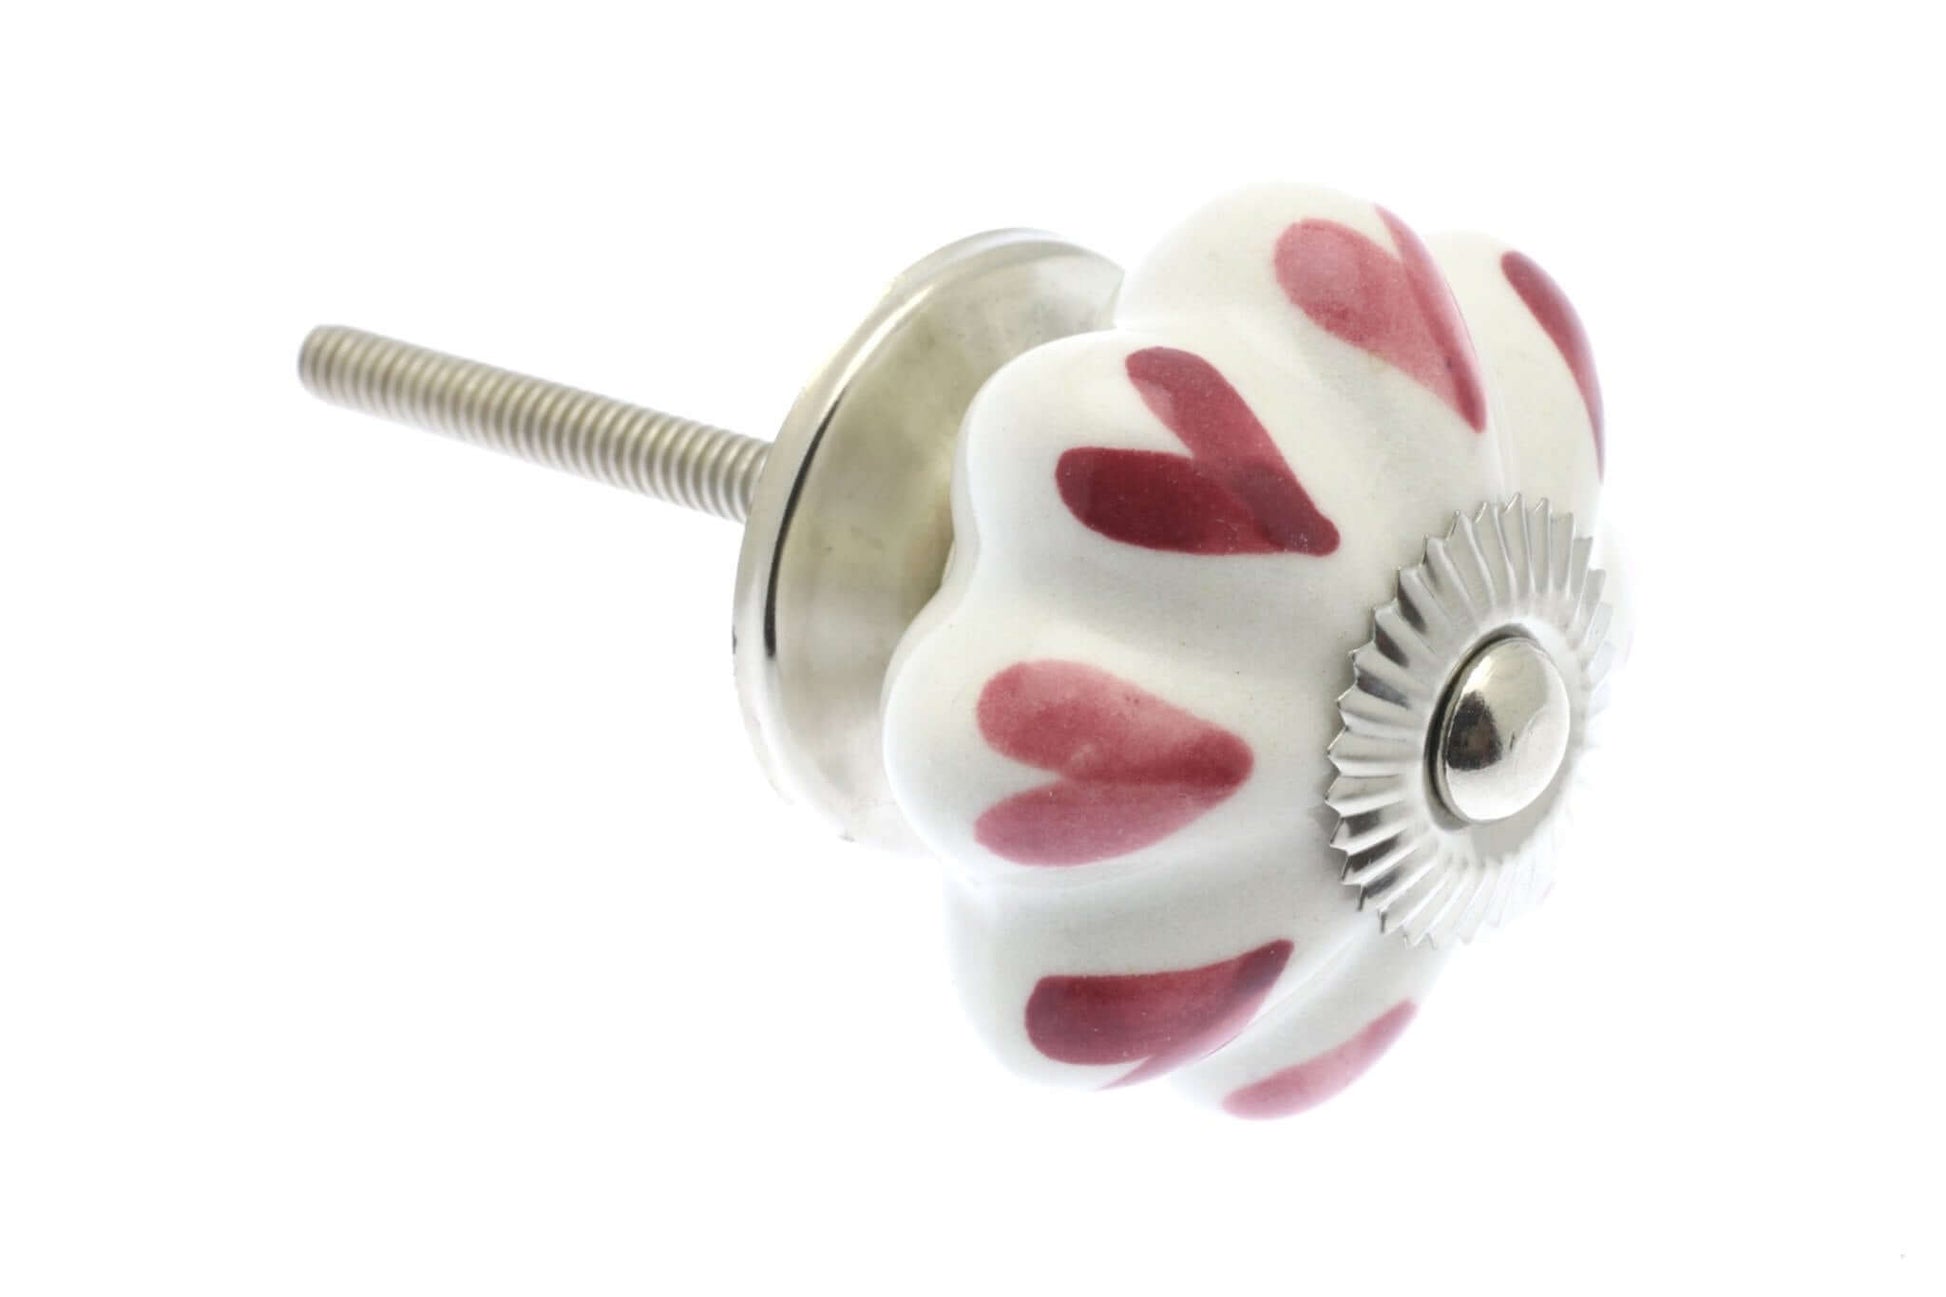 Ceramic Cupboard Knobs - Dark & Pale Pink Hearts On White 42mm Fan Shaped Ceramic Cupboard Knob - Polished Chrome Base & Fixings (EF-06-PKW)